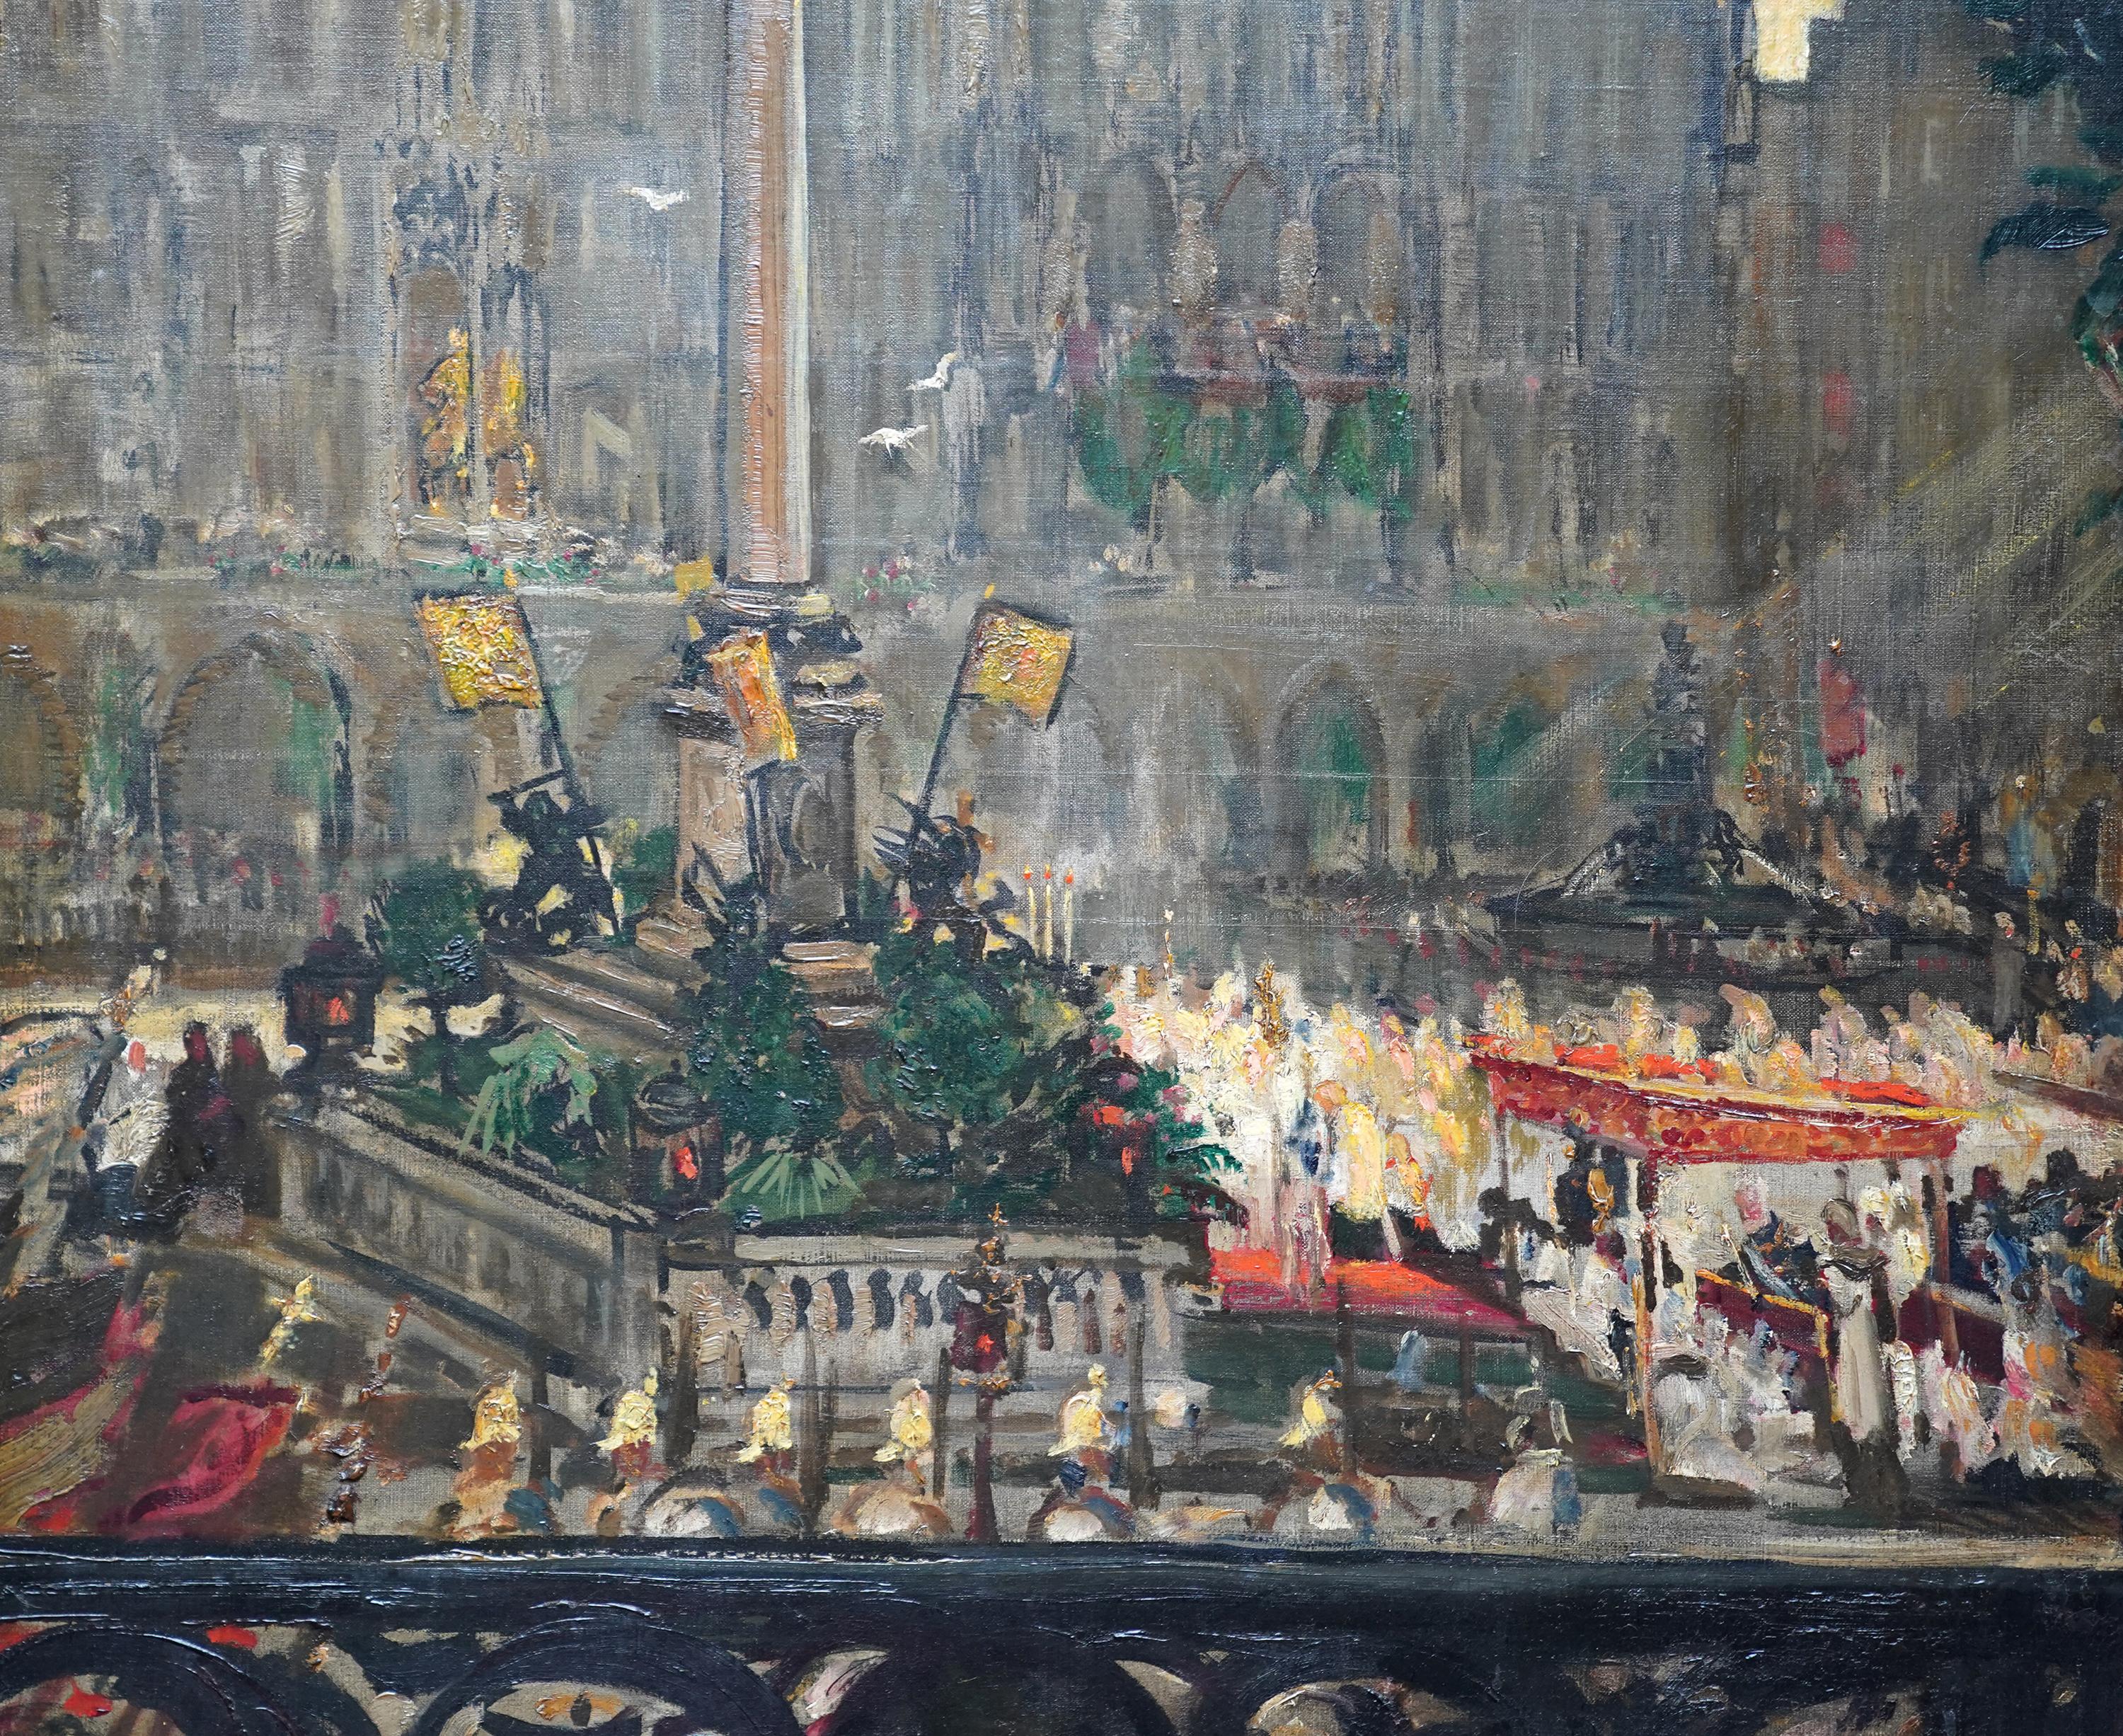 This superb French Impressionist city landscape oil painting is attributed to Jacques Emile Blanche and has his characteristic brushwork. It was painted circa 1900 and portrays a civic ceremony in the Marienplatz, a central square in the centre of